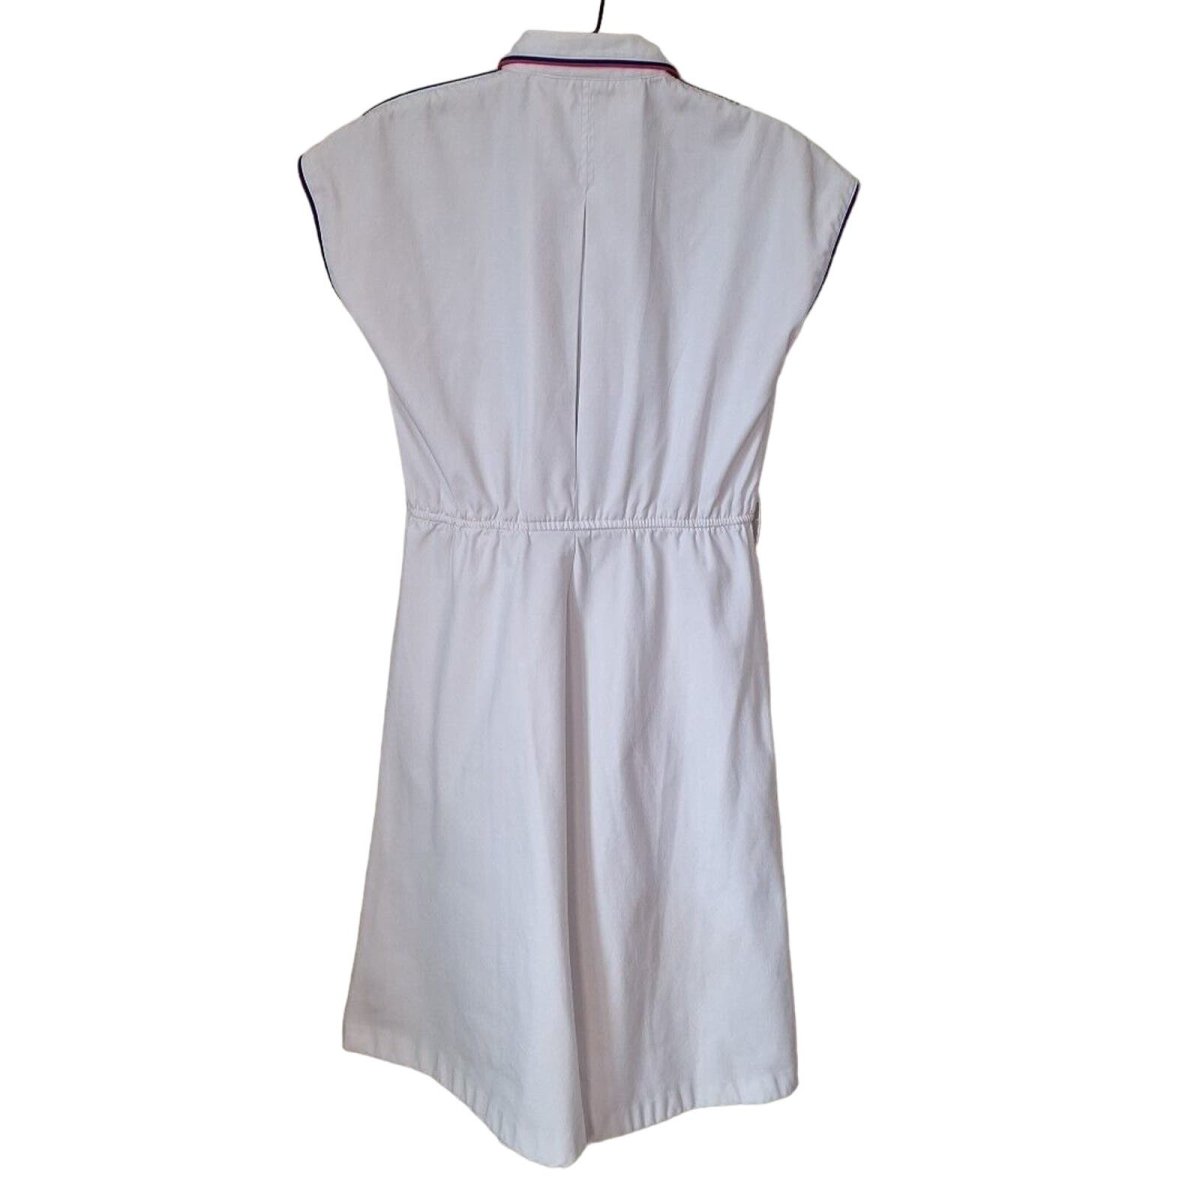 Vintage 80s Sporty White Capped Sleeve Dress Women Size Medium - themallvintage The Mall Vintage